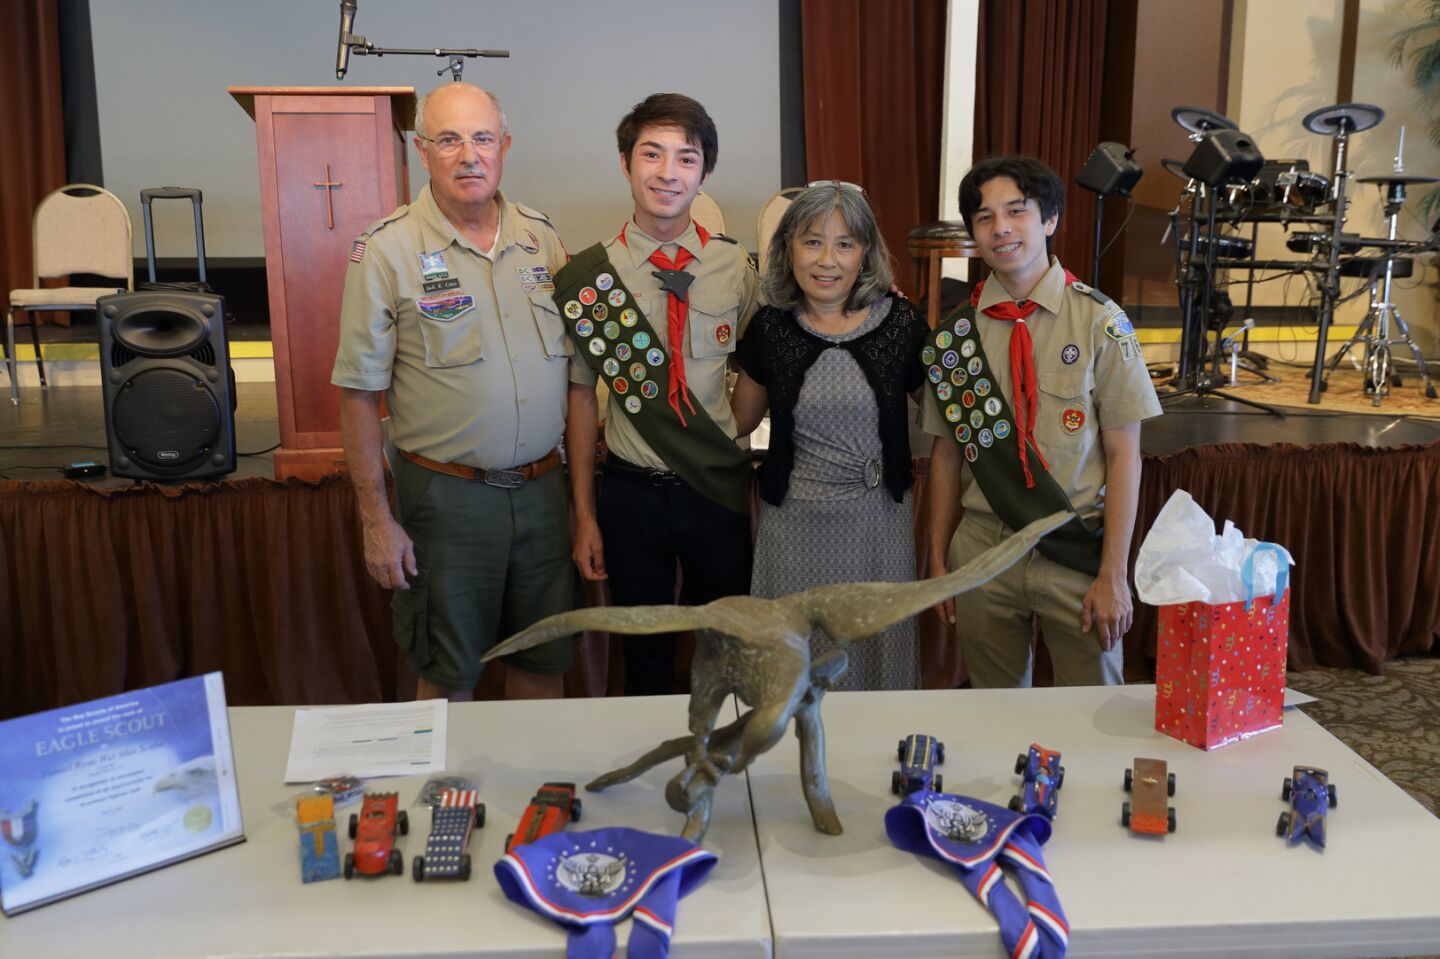 Jack Cater (Asst Zone Committee & Eagle Project Counselor), Eagle Scout candidate David Scuba, Linda Leong, Eagle Scout candidate Daniel Scuba